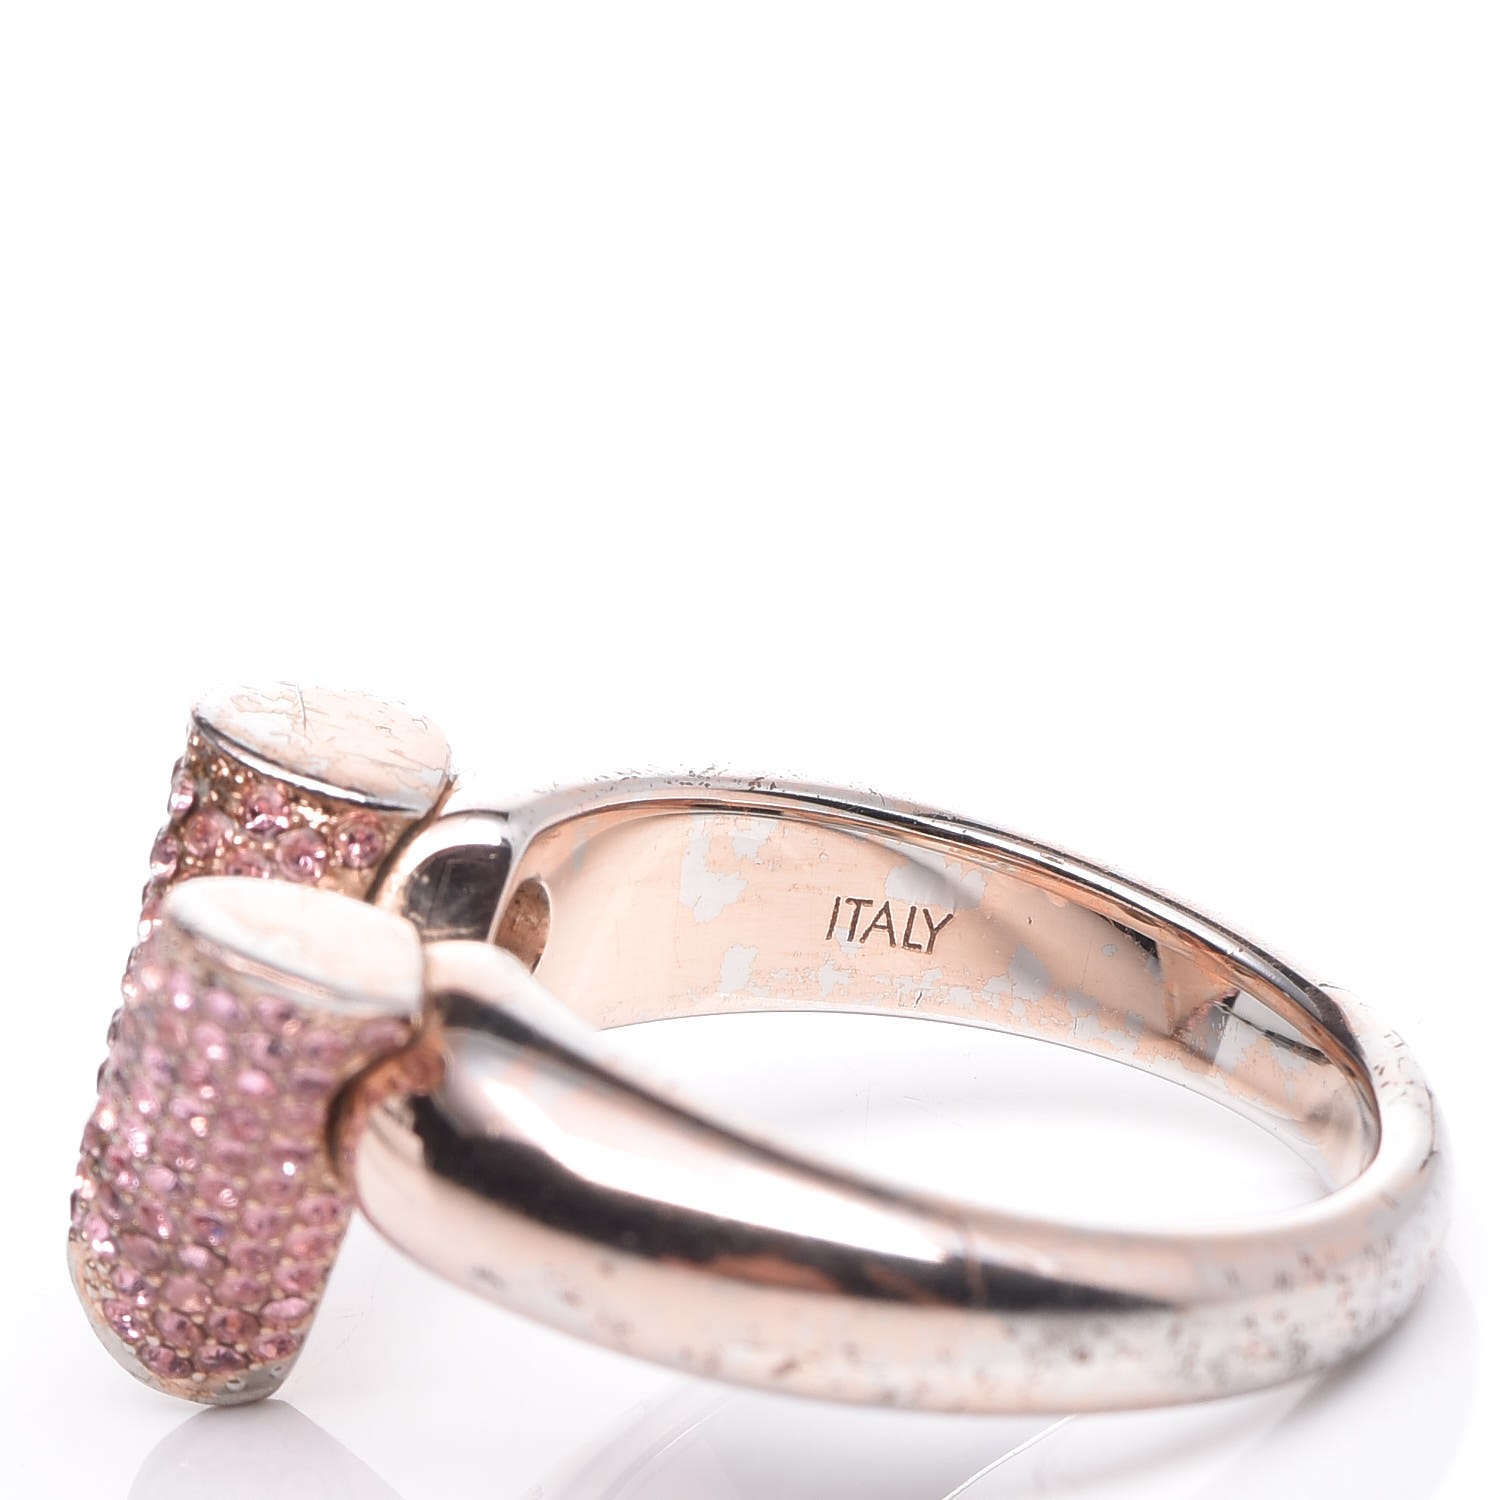 Products by Louis Vuitton: My Blooming Strass Ring - Wishupon